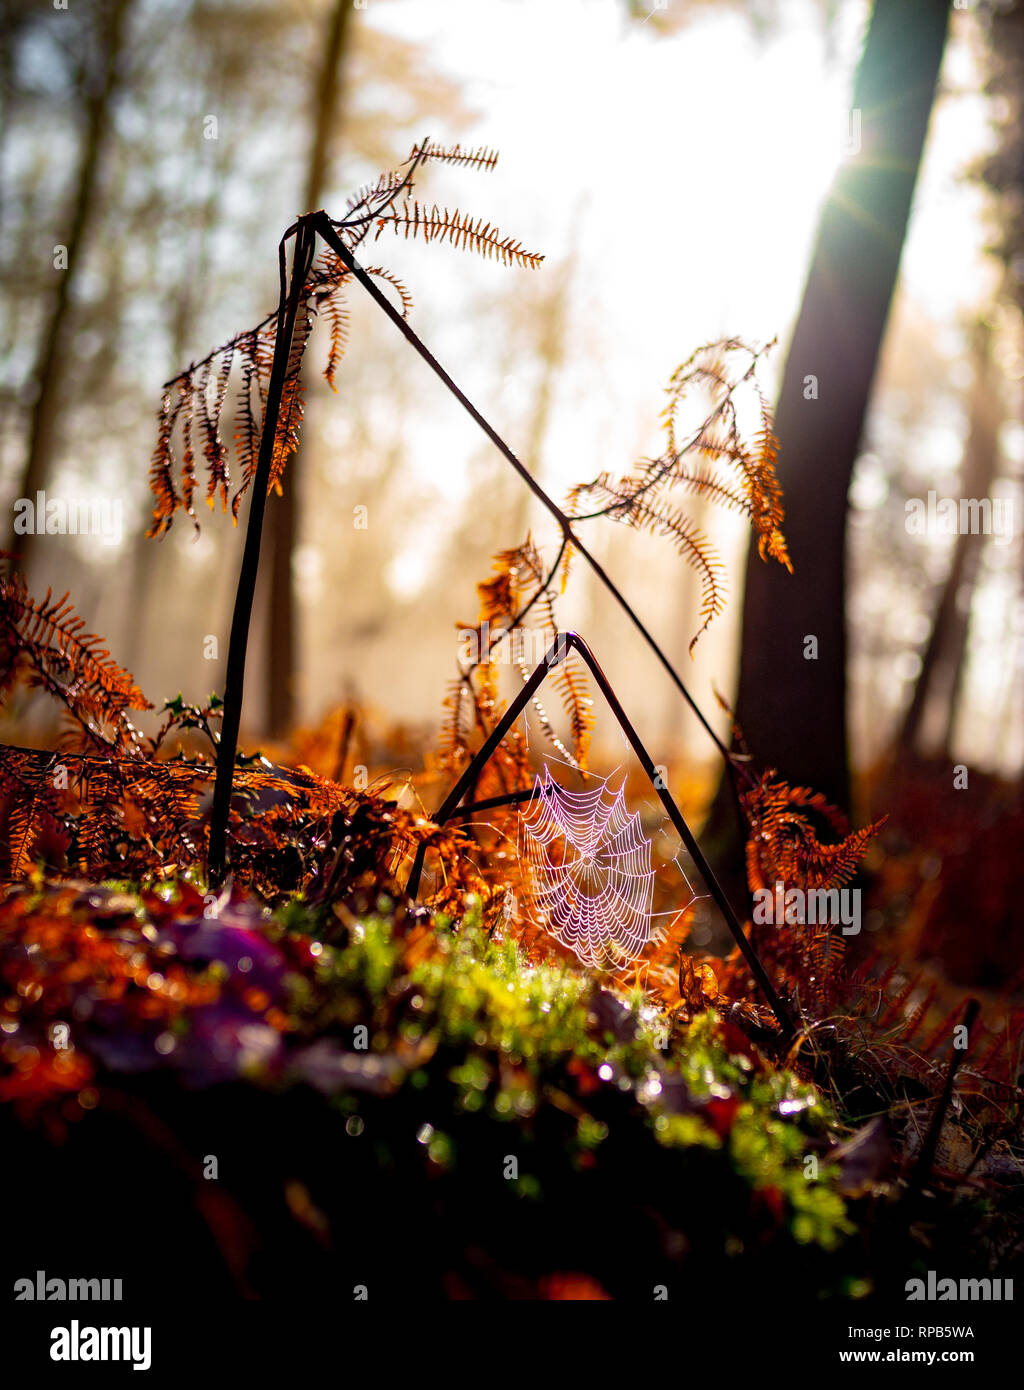 Beautiful misty colourful Autumnal scene of ferns in the NewForest with a connected spider web covered in dew with the sun breaking in the background. Stock Photo